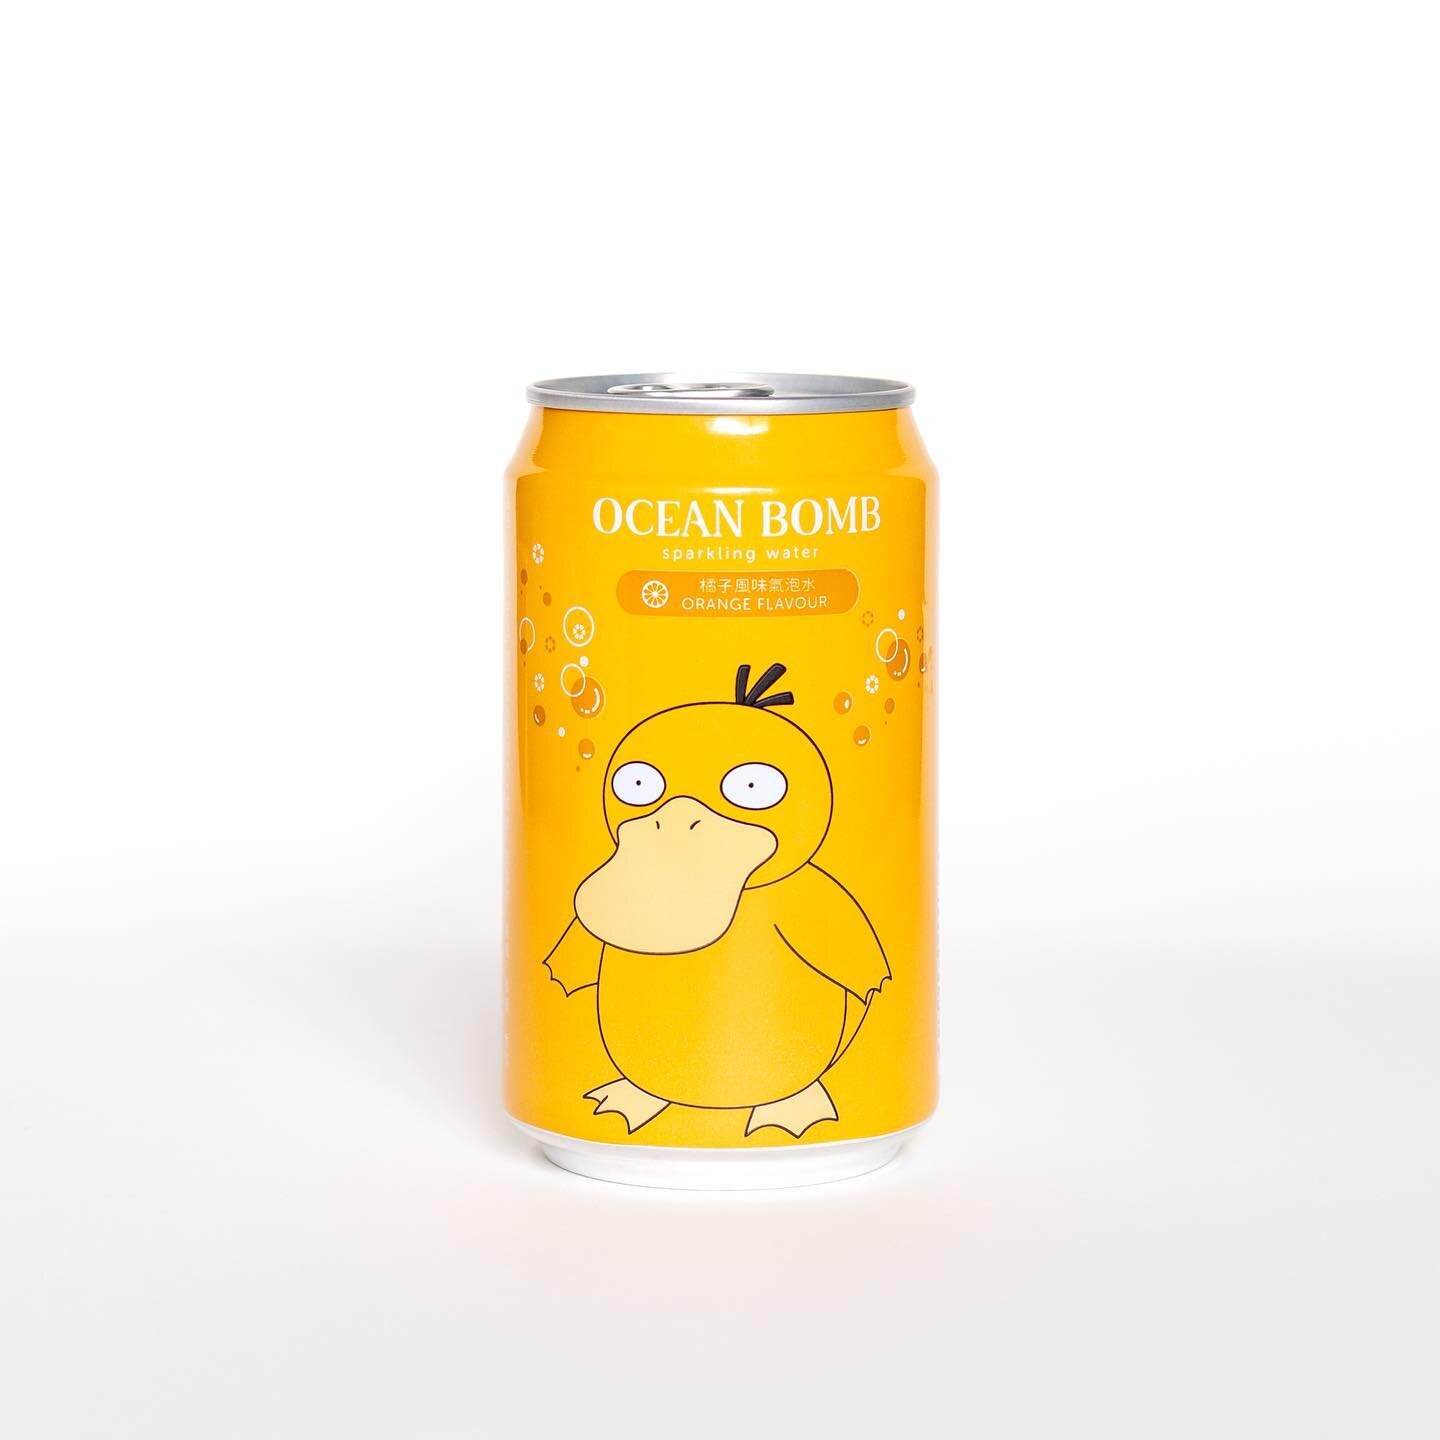 Did you know that Psyduck is called &ldquo;Psykokwak&rdquo; in French? 😆🦆
#pokemon #psyduck #psykokwak #oceanbomb #soda #productphotography #stilllife